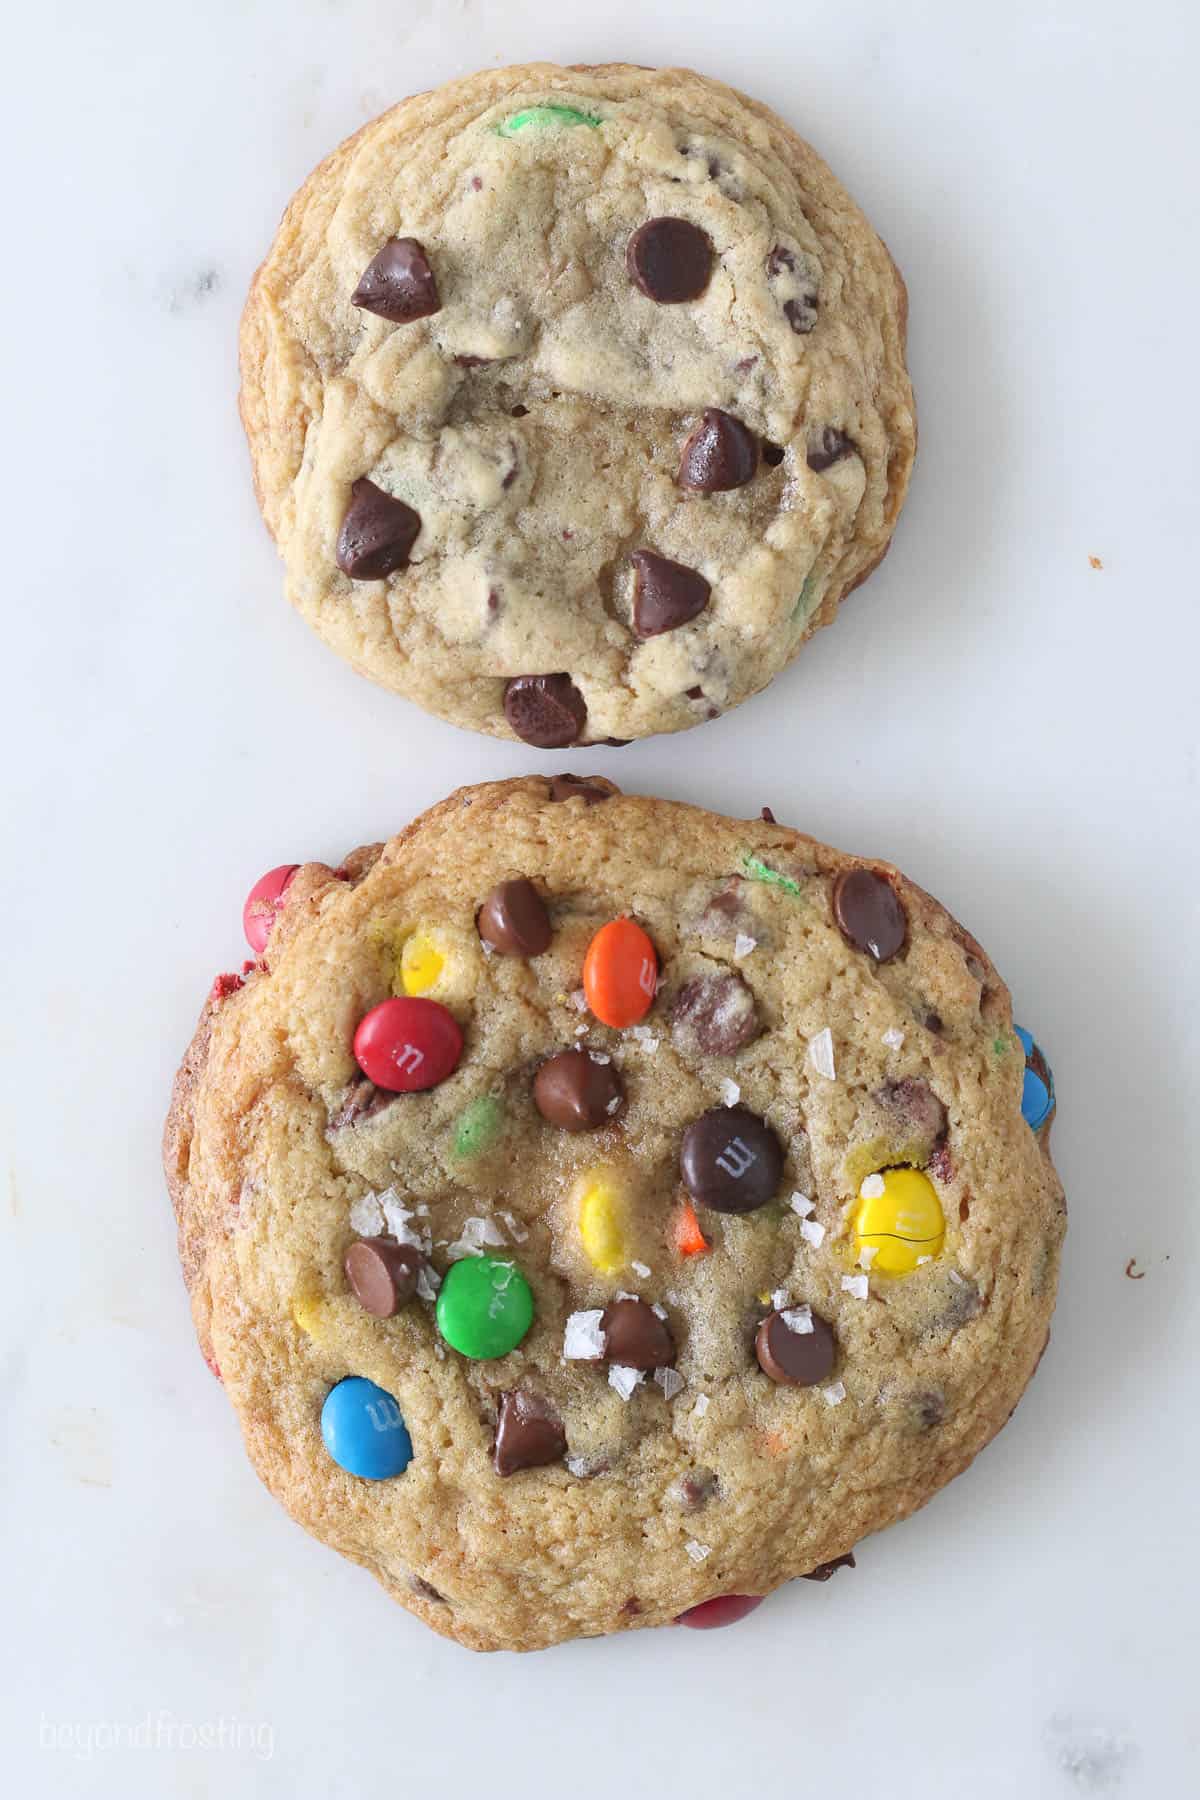 A giant and regular sized chocolate chip M&M cookie